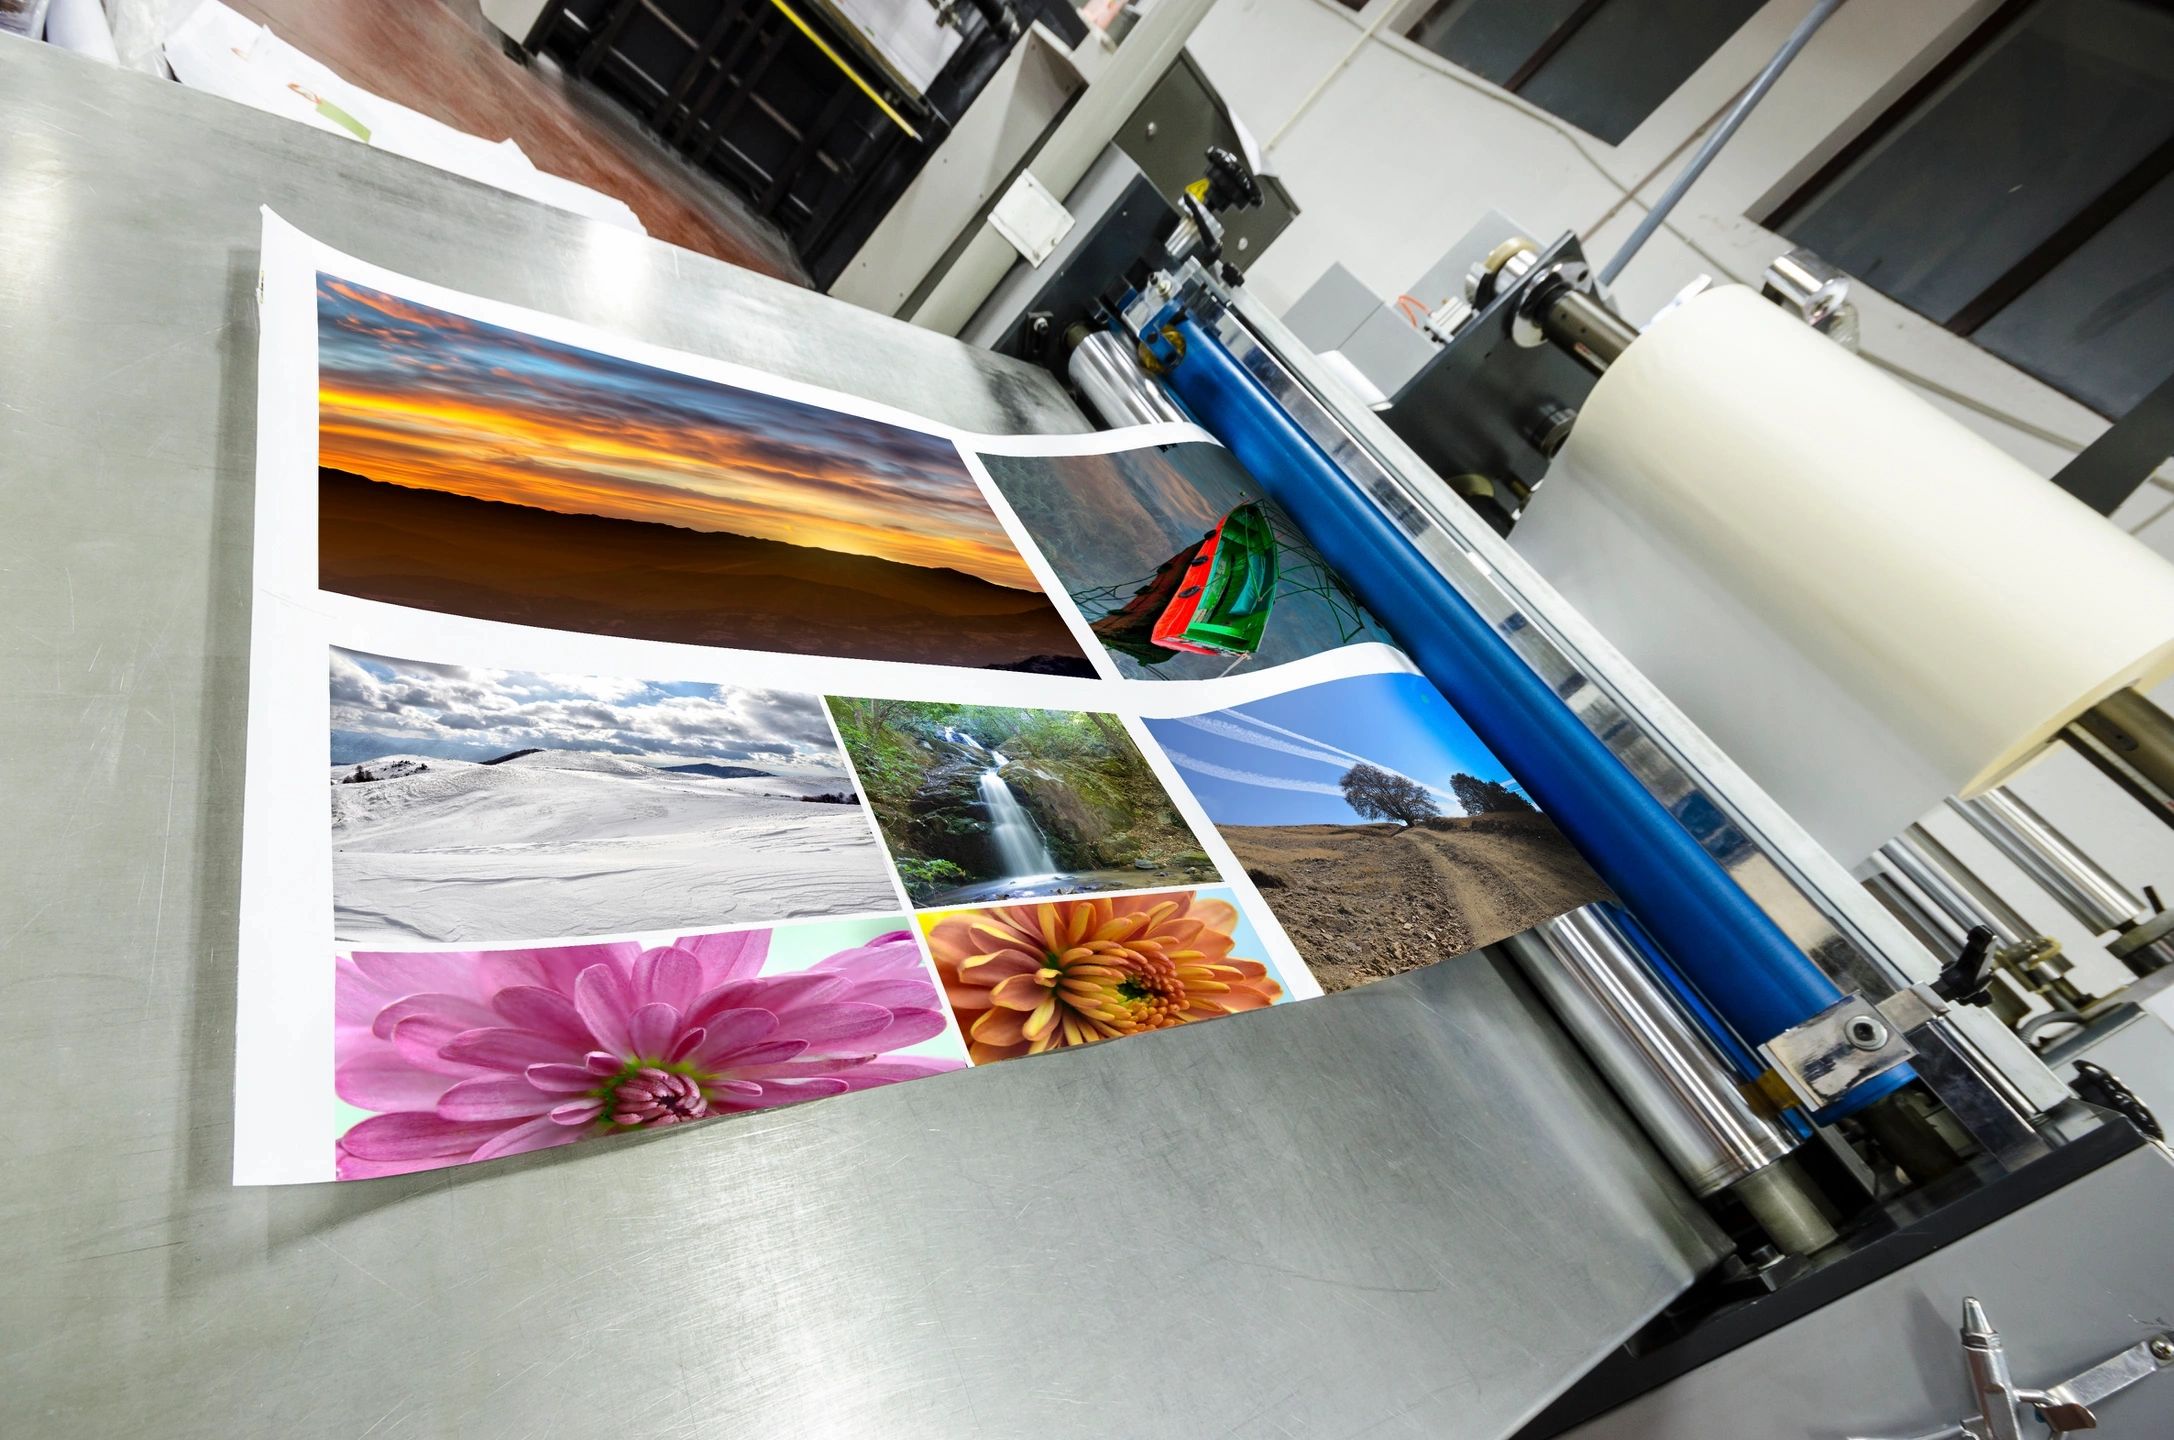 OUR PRODUCTION DEPARTMENT PROVIDES A VARIETY OF MOUNTING AND FINISHING SERVICES